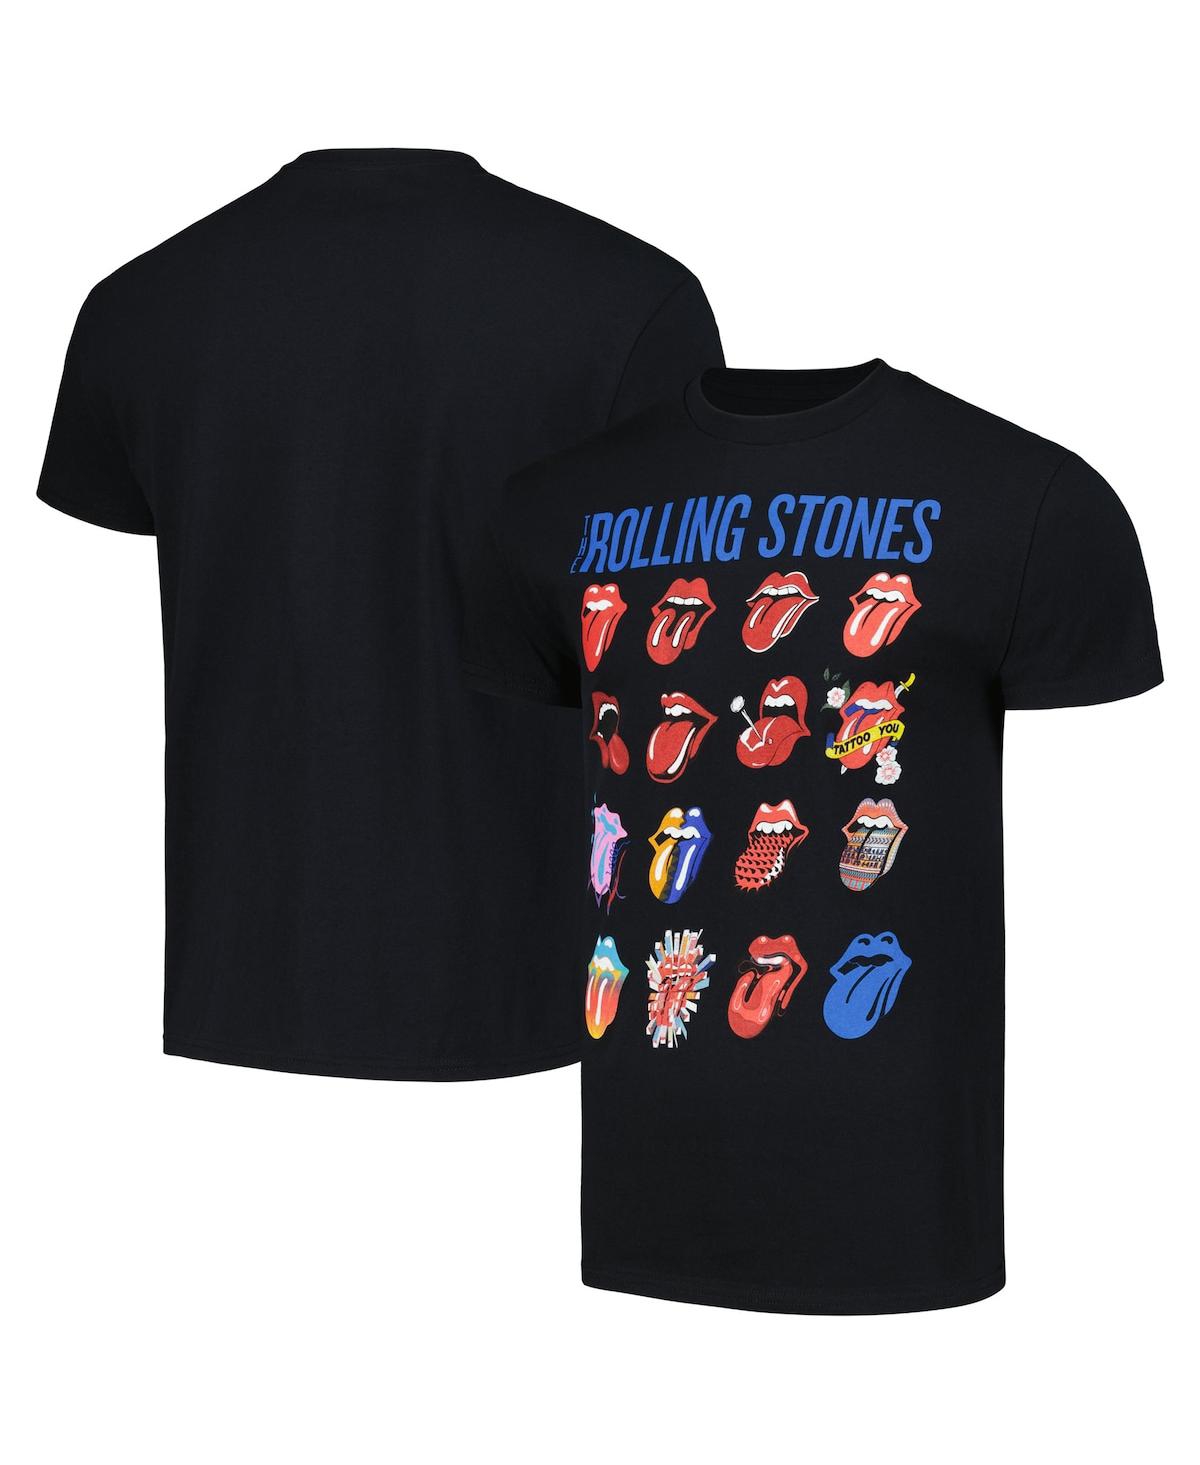 Men's and Women's Black Rolling Stones Evolution and Lonesome Blue T-shirt - Black